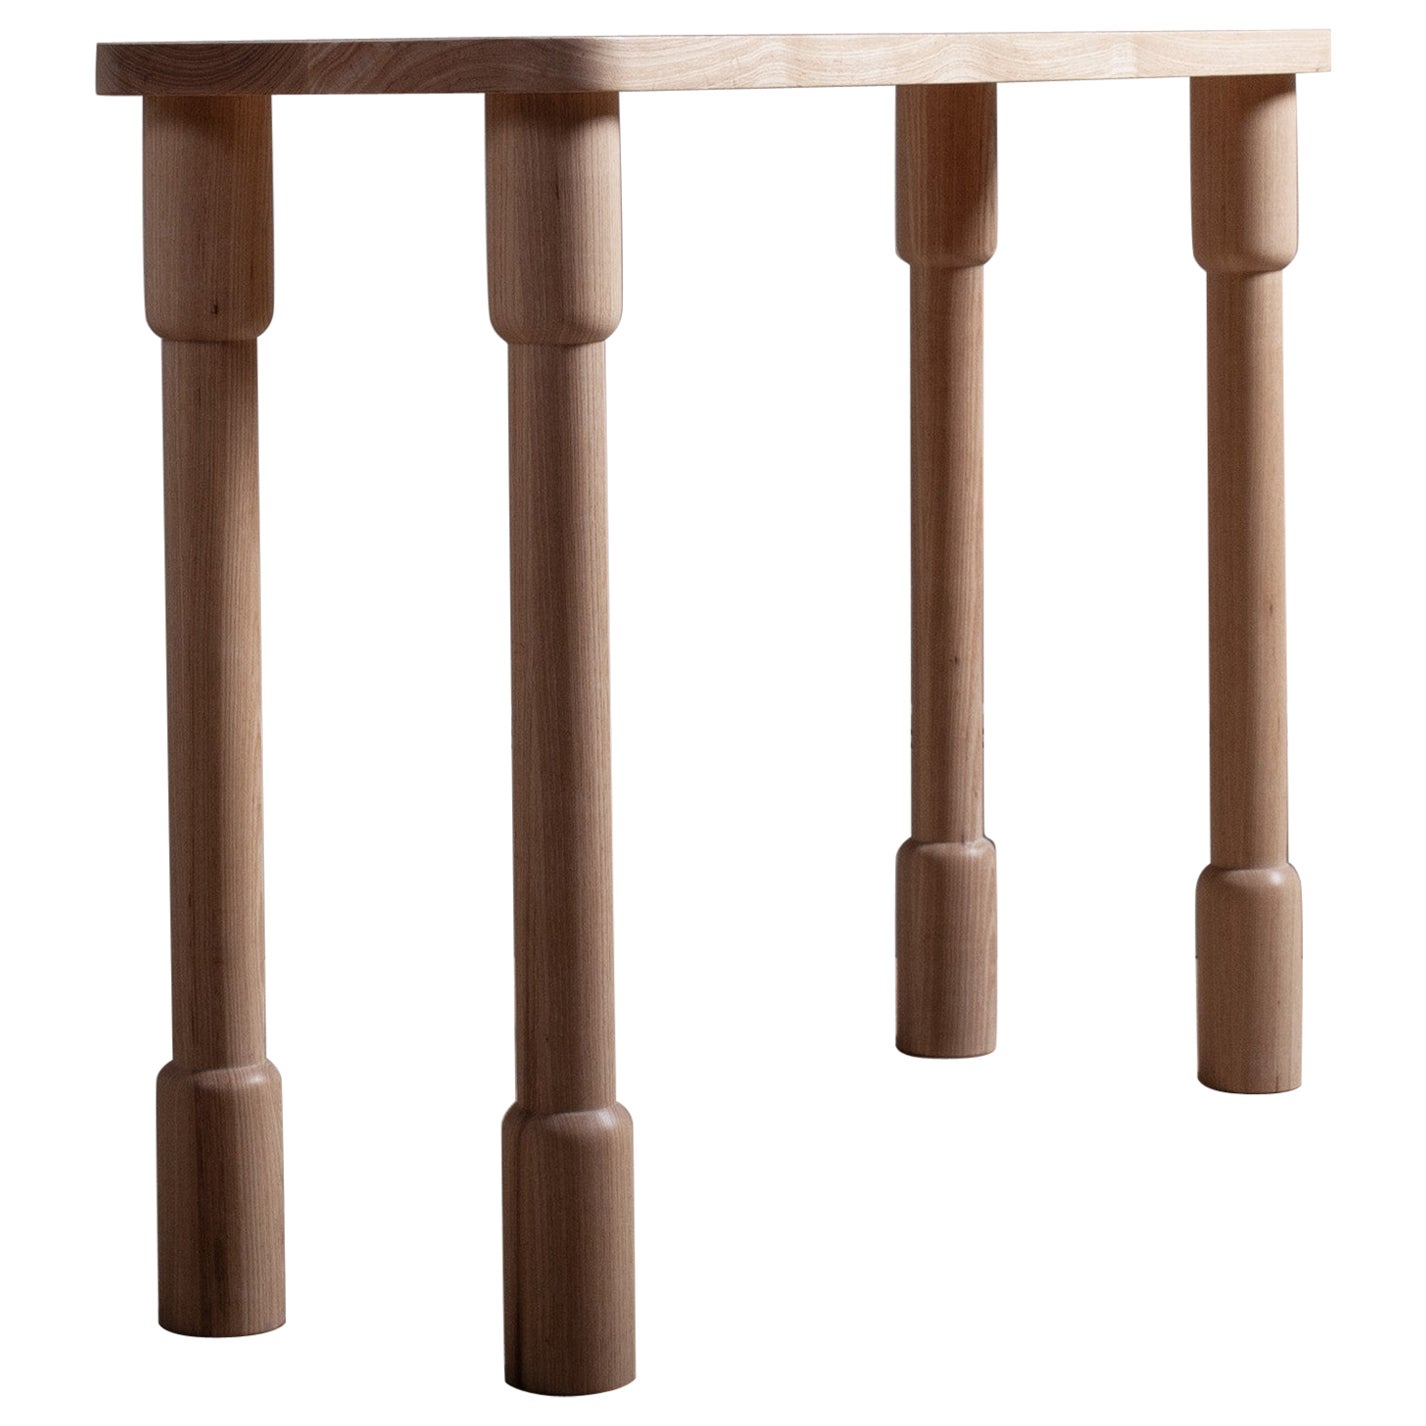 Table console anglaise architecturale